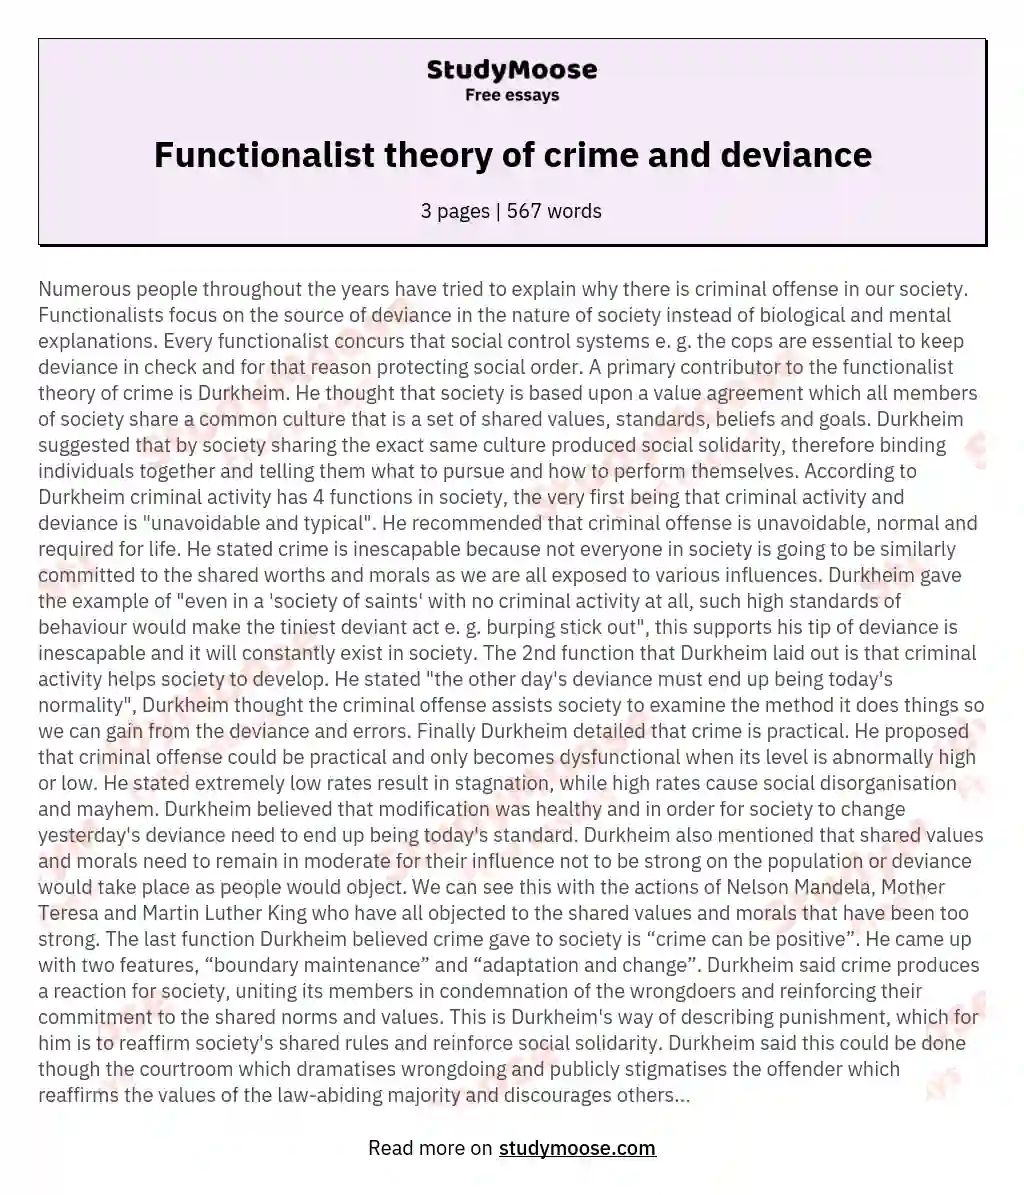 Functionalist theory of crime and deviance essay